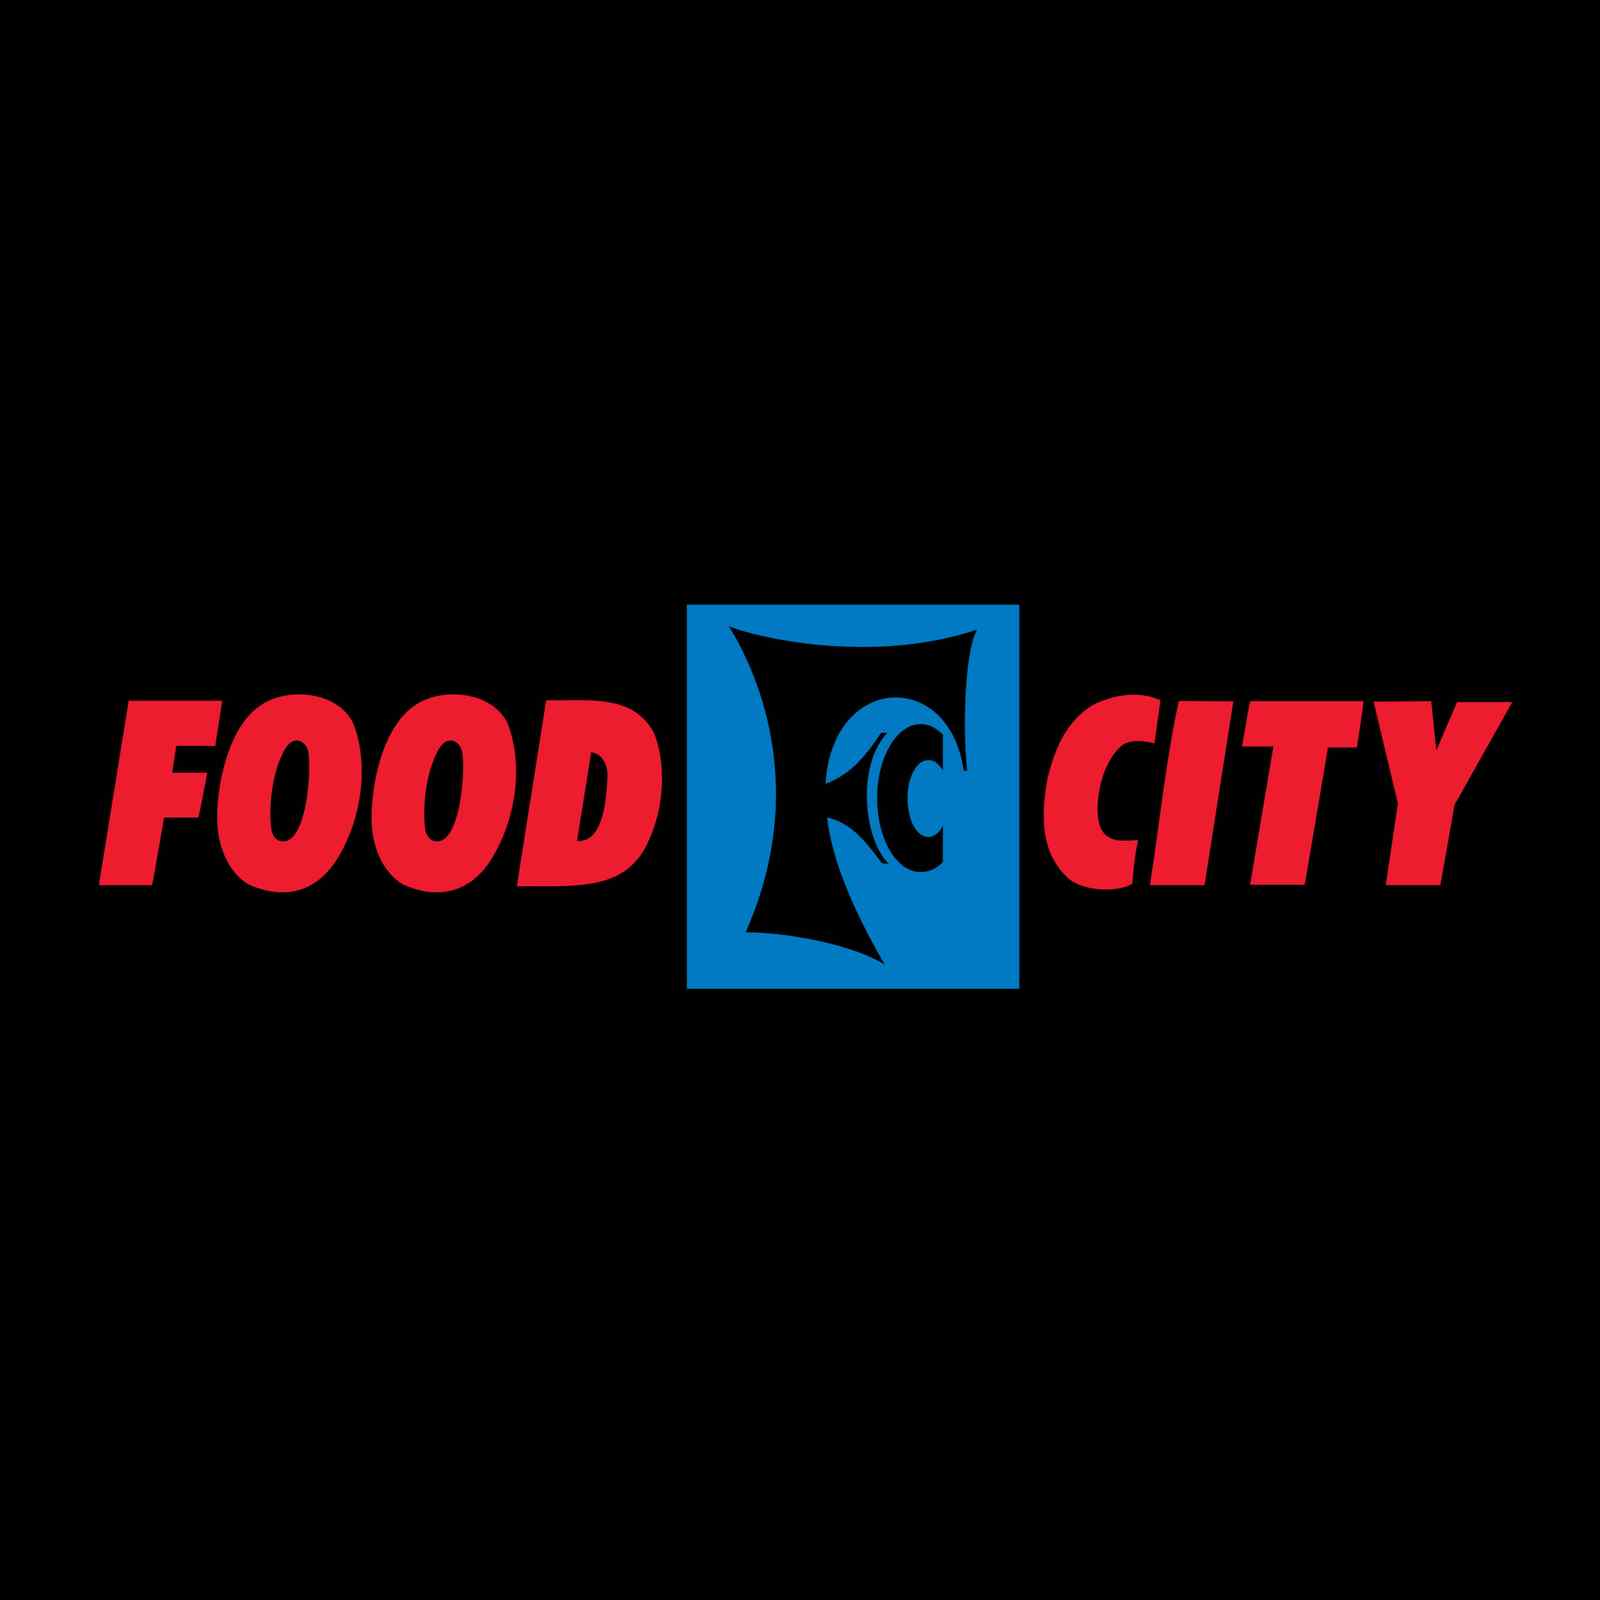 Food City partners with Richard Petty to celebrate Paralyzed Veterans of America’s 75th anniversary with in-store donation drive